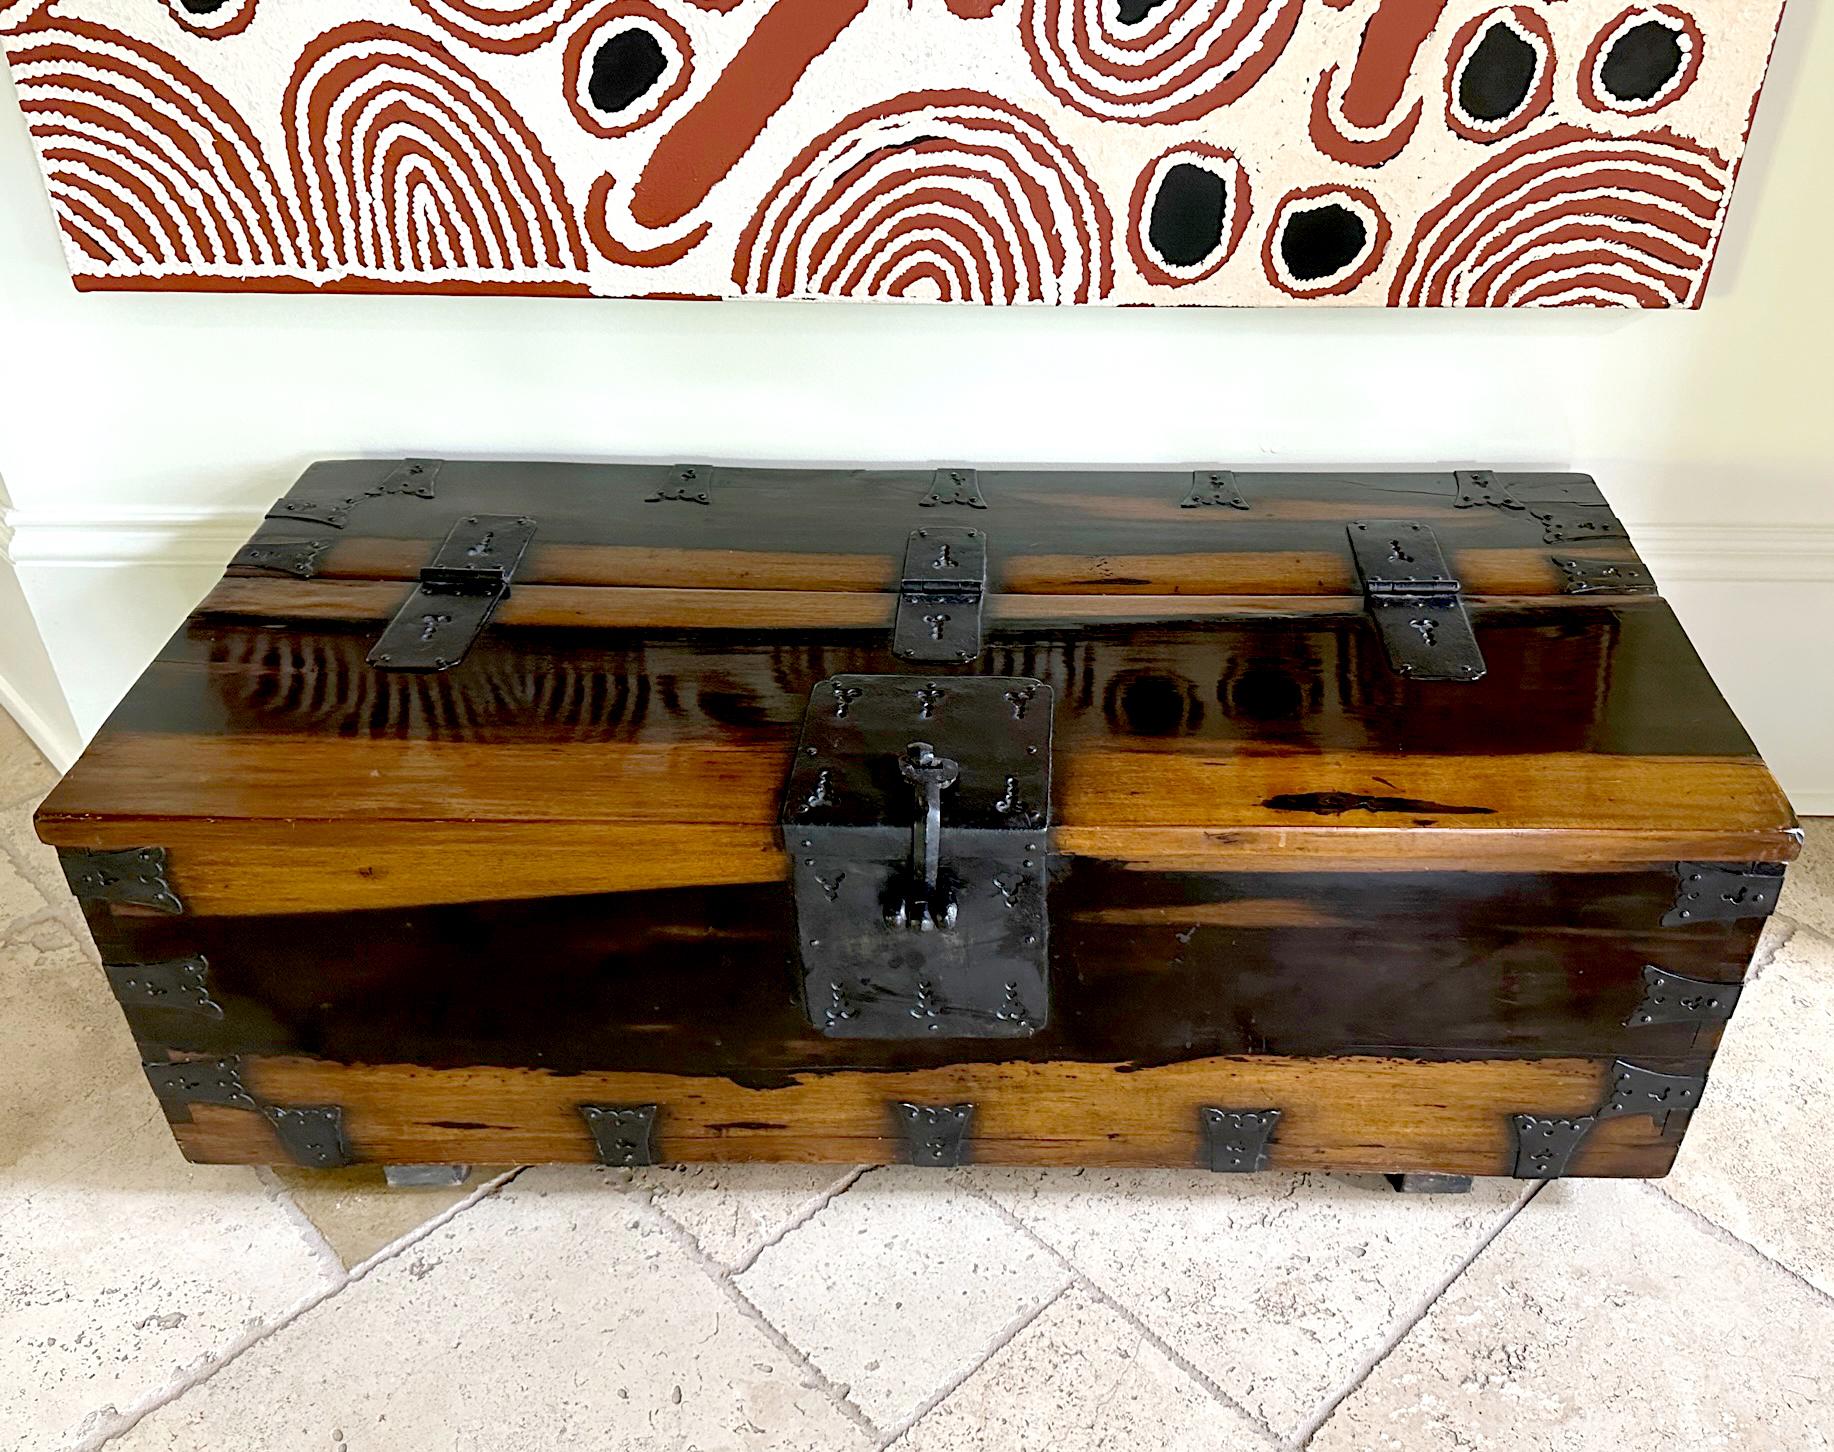 A large Korean top-lid chest on block feet circa late 19th century Joseon Dynasty. Known as coin chest (Ton-Kwe in Korean), this type of chest was originally used for storing money. The larger versions were probably used to store other valuables.